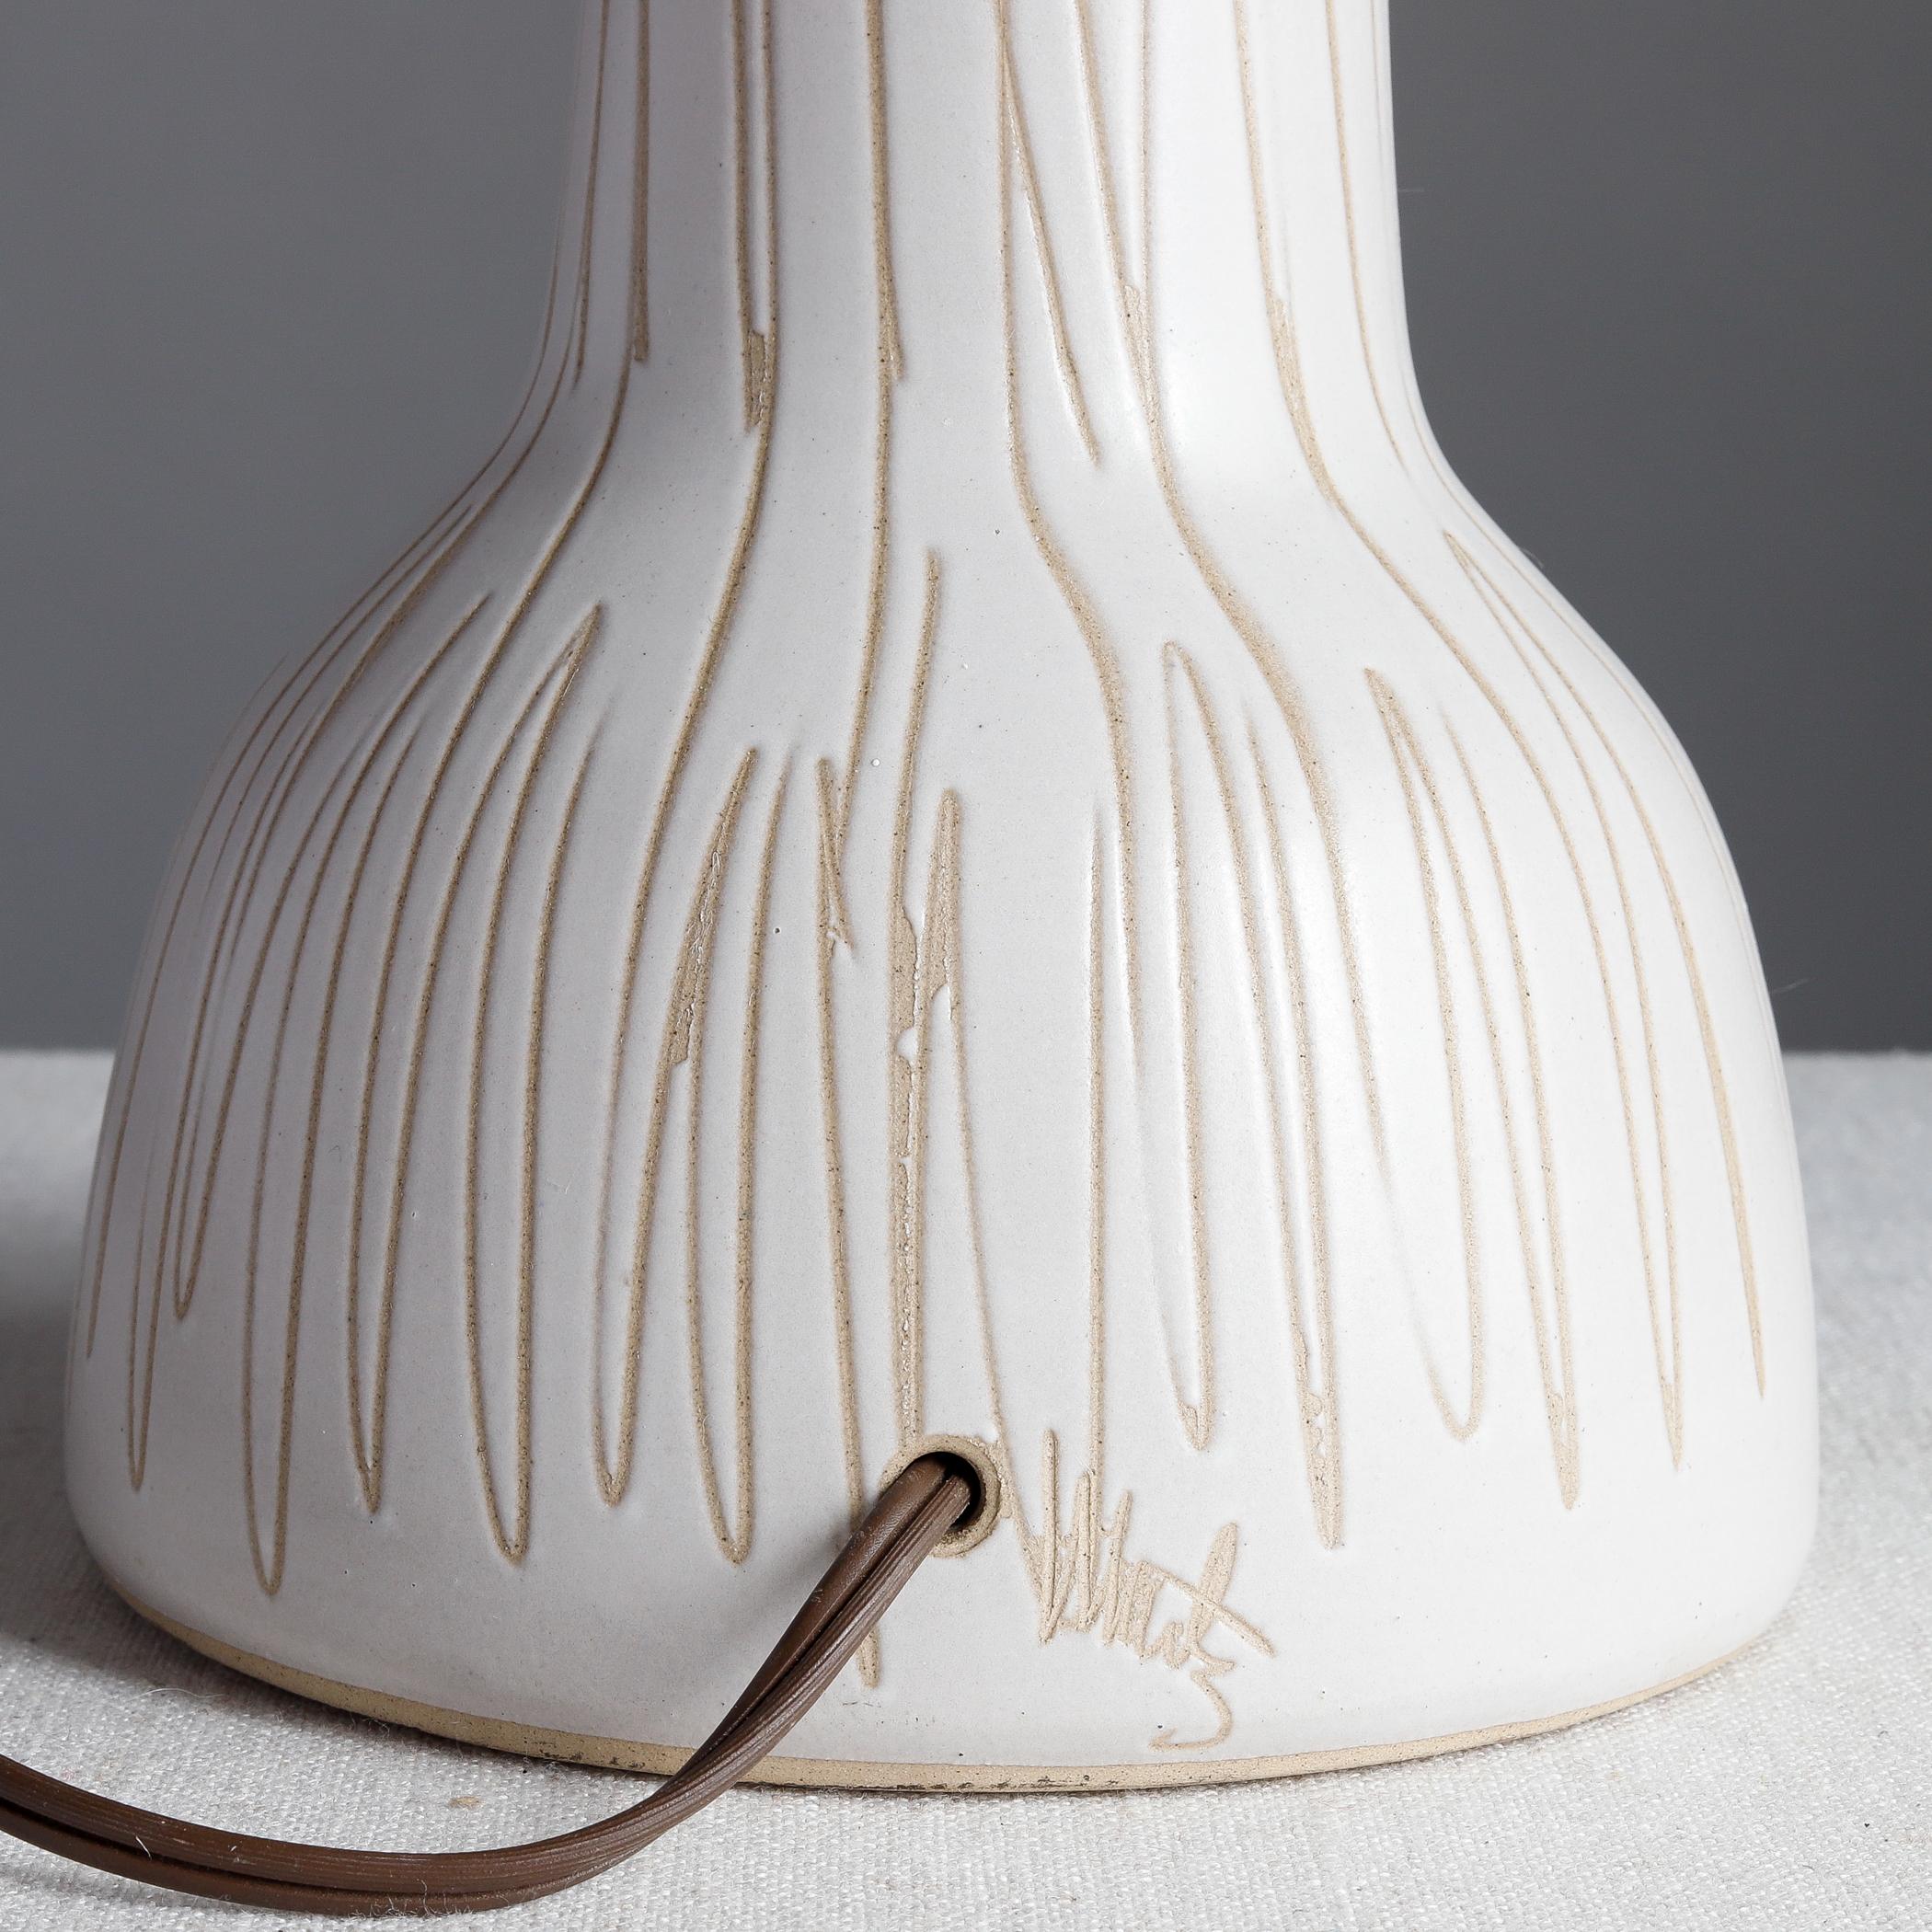 Jane and Gordon Martz Stoneware Lamp Marshall Studios, White Incised Sgraffito In Good Condition For Sale In Raleigh, NC